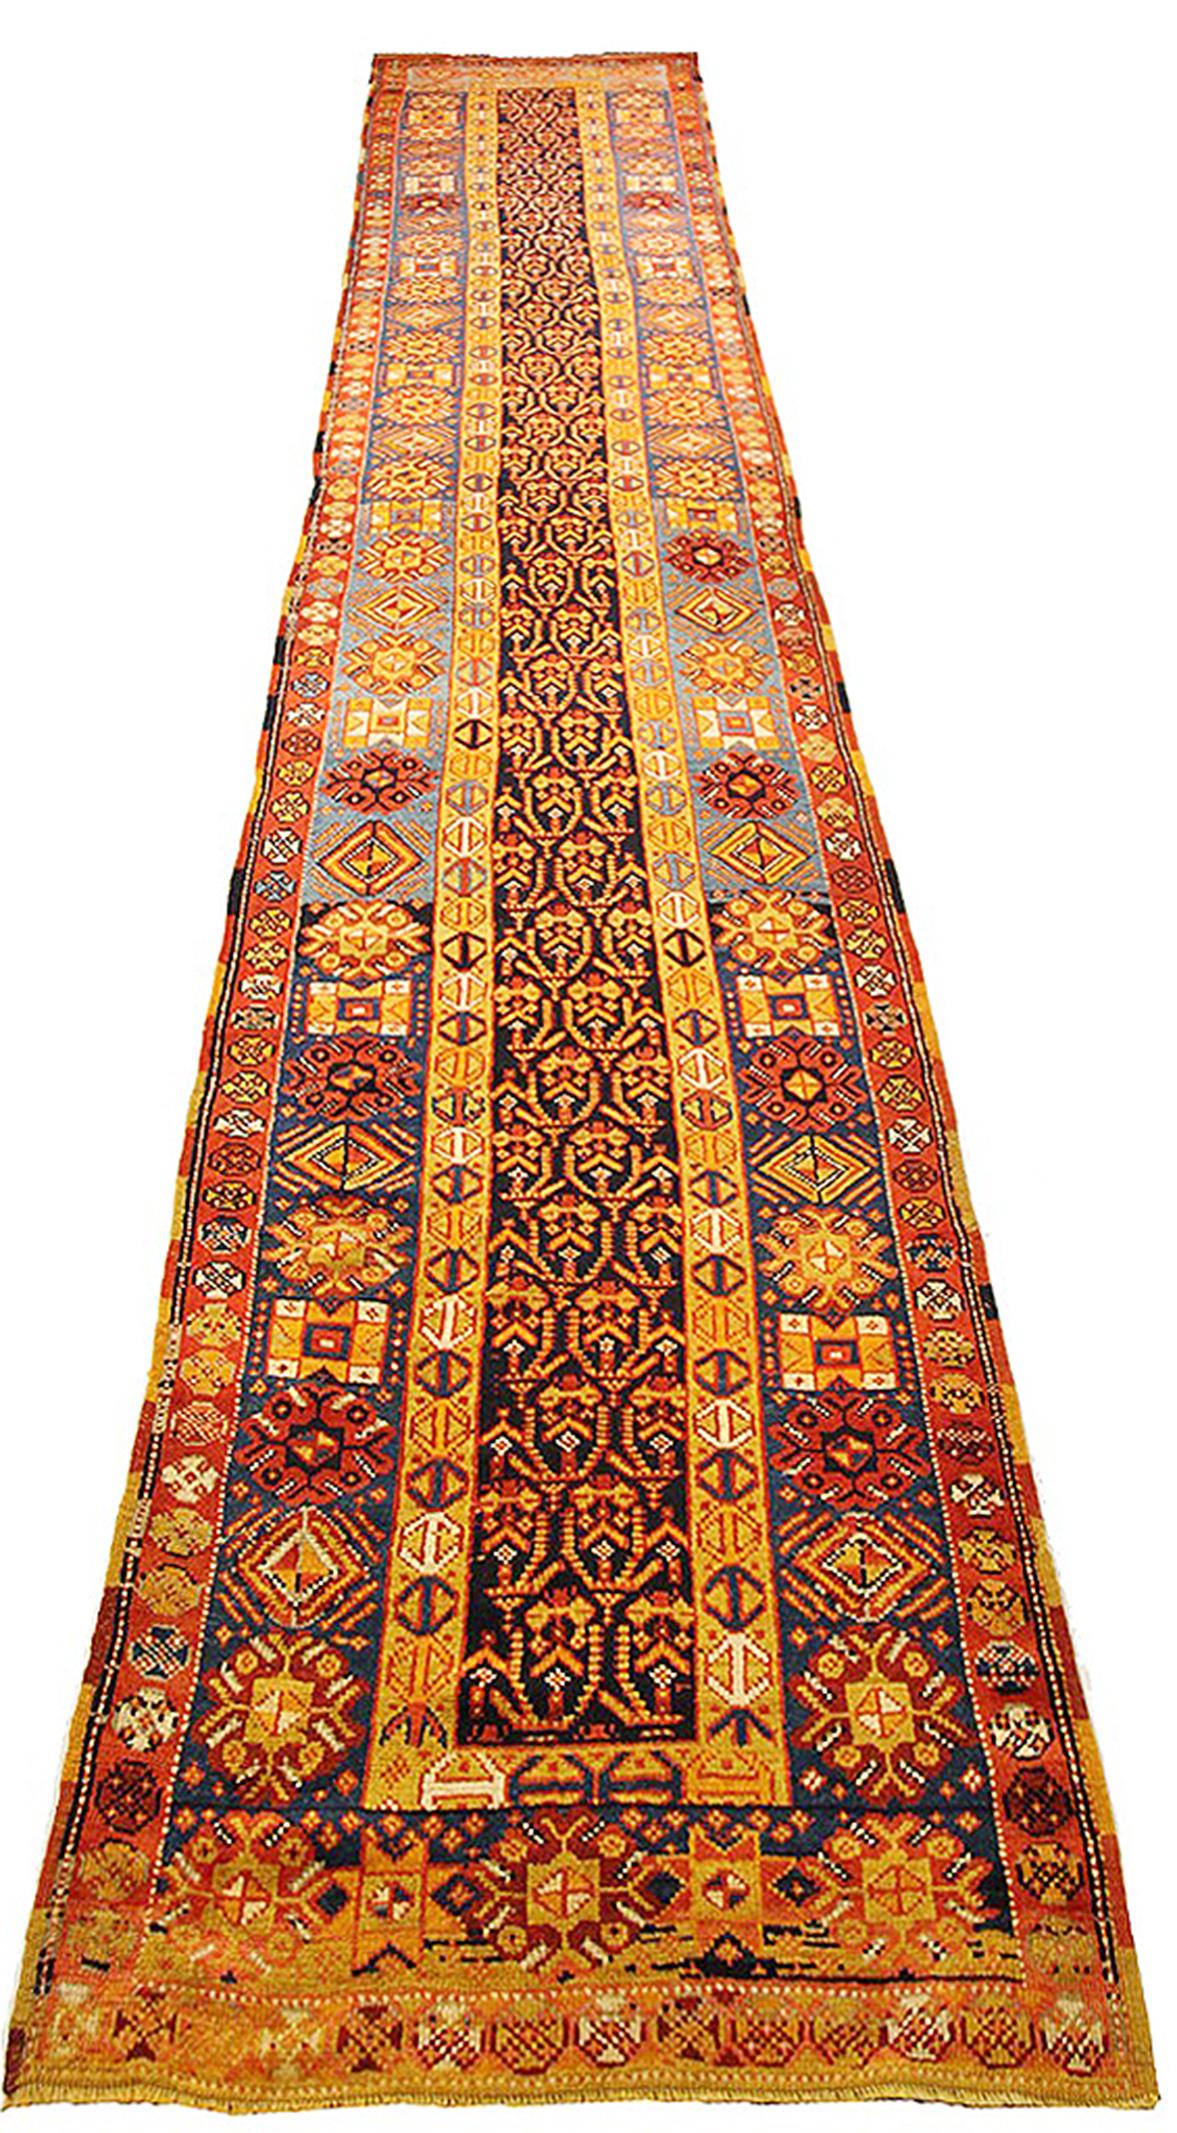 1900s Antique Turkish Oushak Runner Rug with Red and Orange Medallions For Sale 2